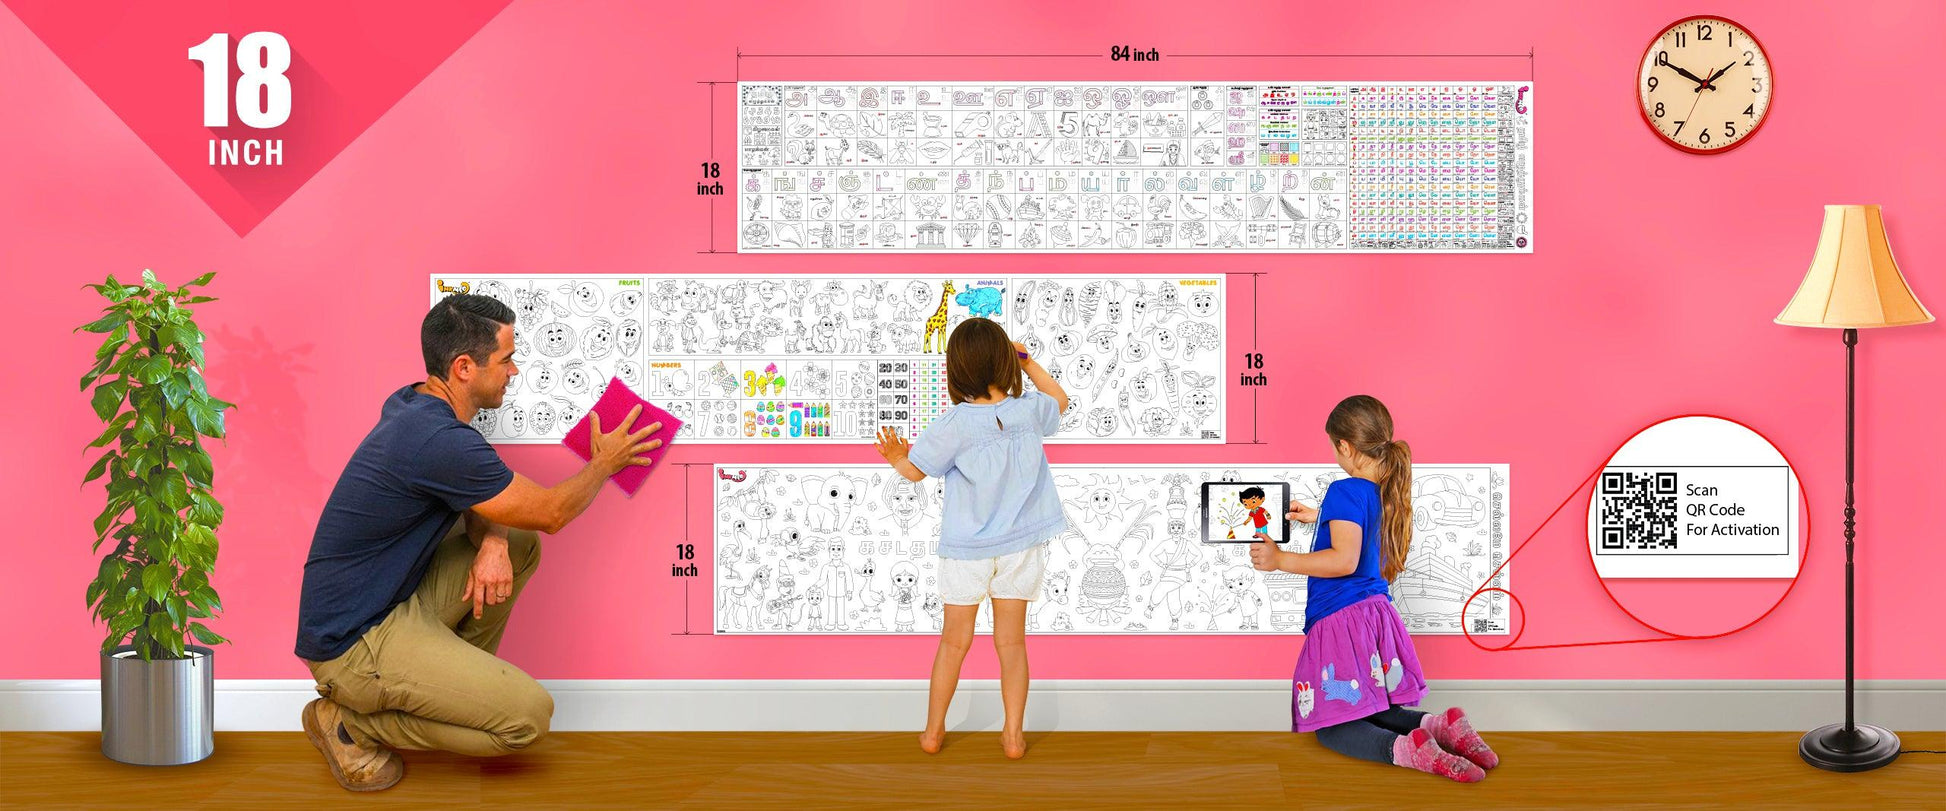 The image depicts a father and his two daughters enjoying a bonding moment while coloring tamil karpom combo pack sheet attached to the wall.